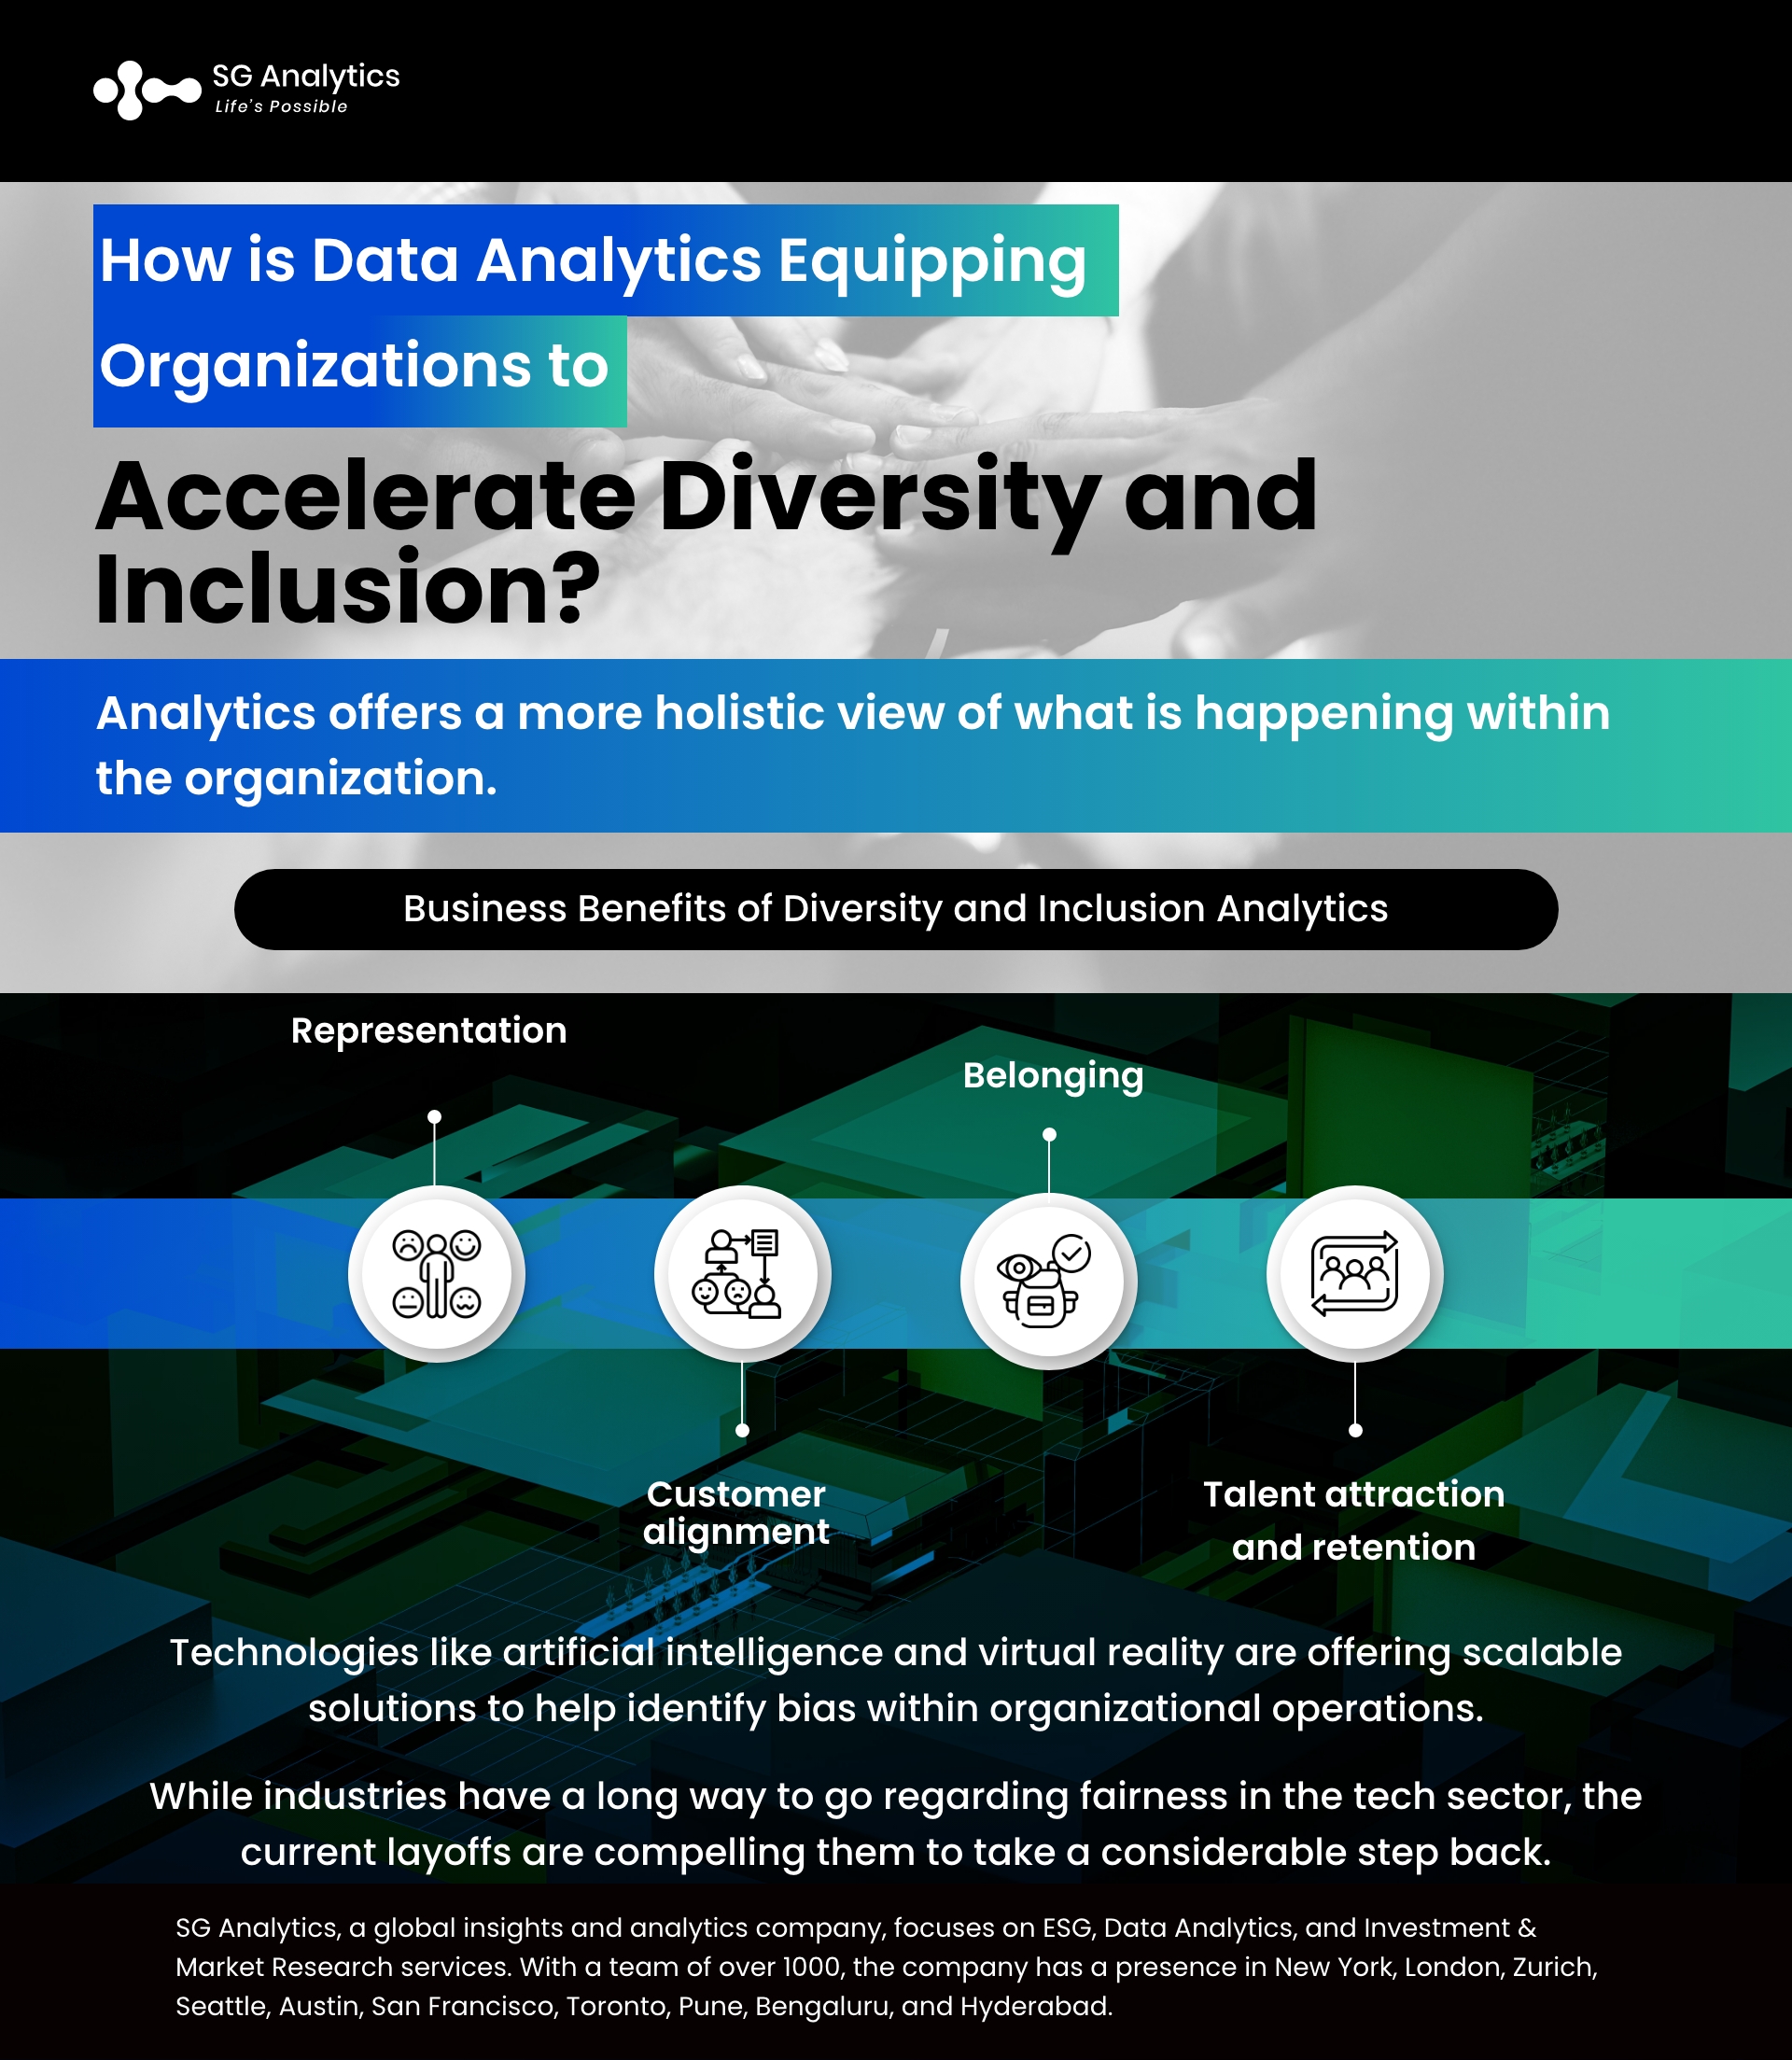 How is Data Analytics Equipping Organizations to Accelerate Diversity and Inclusion